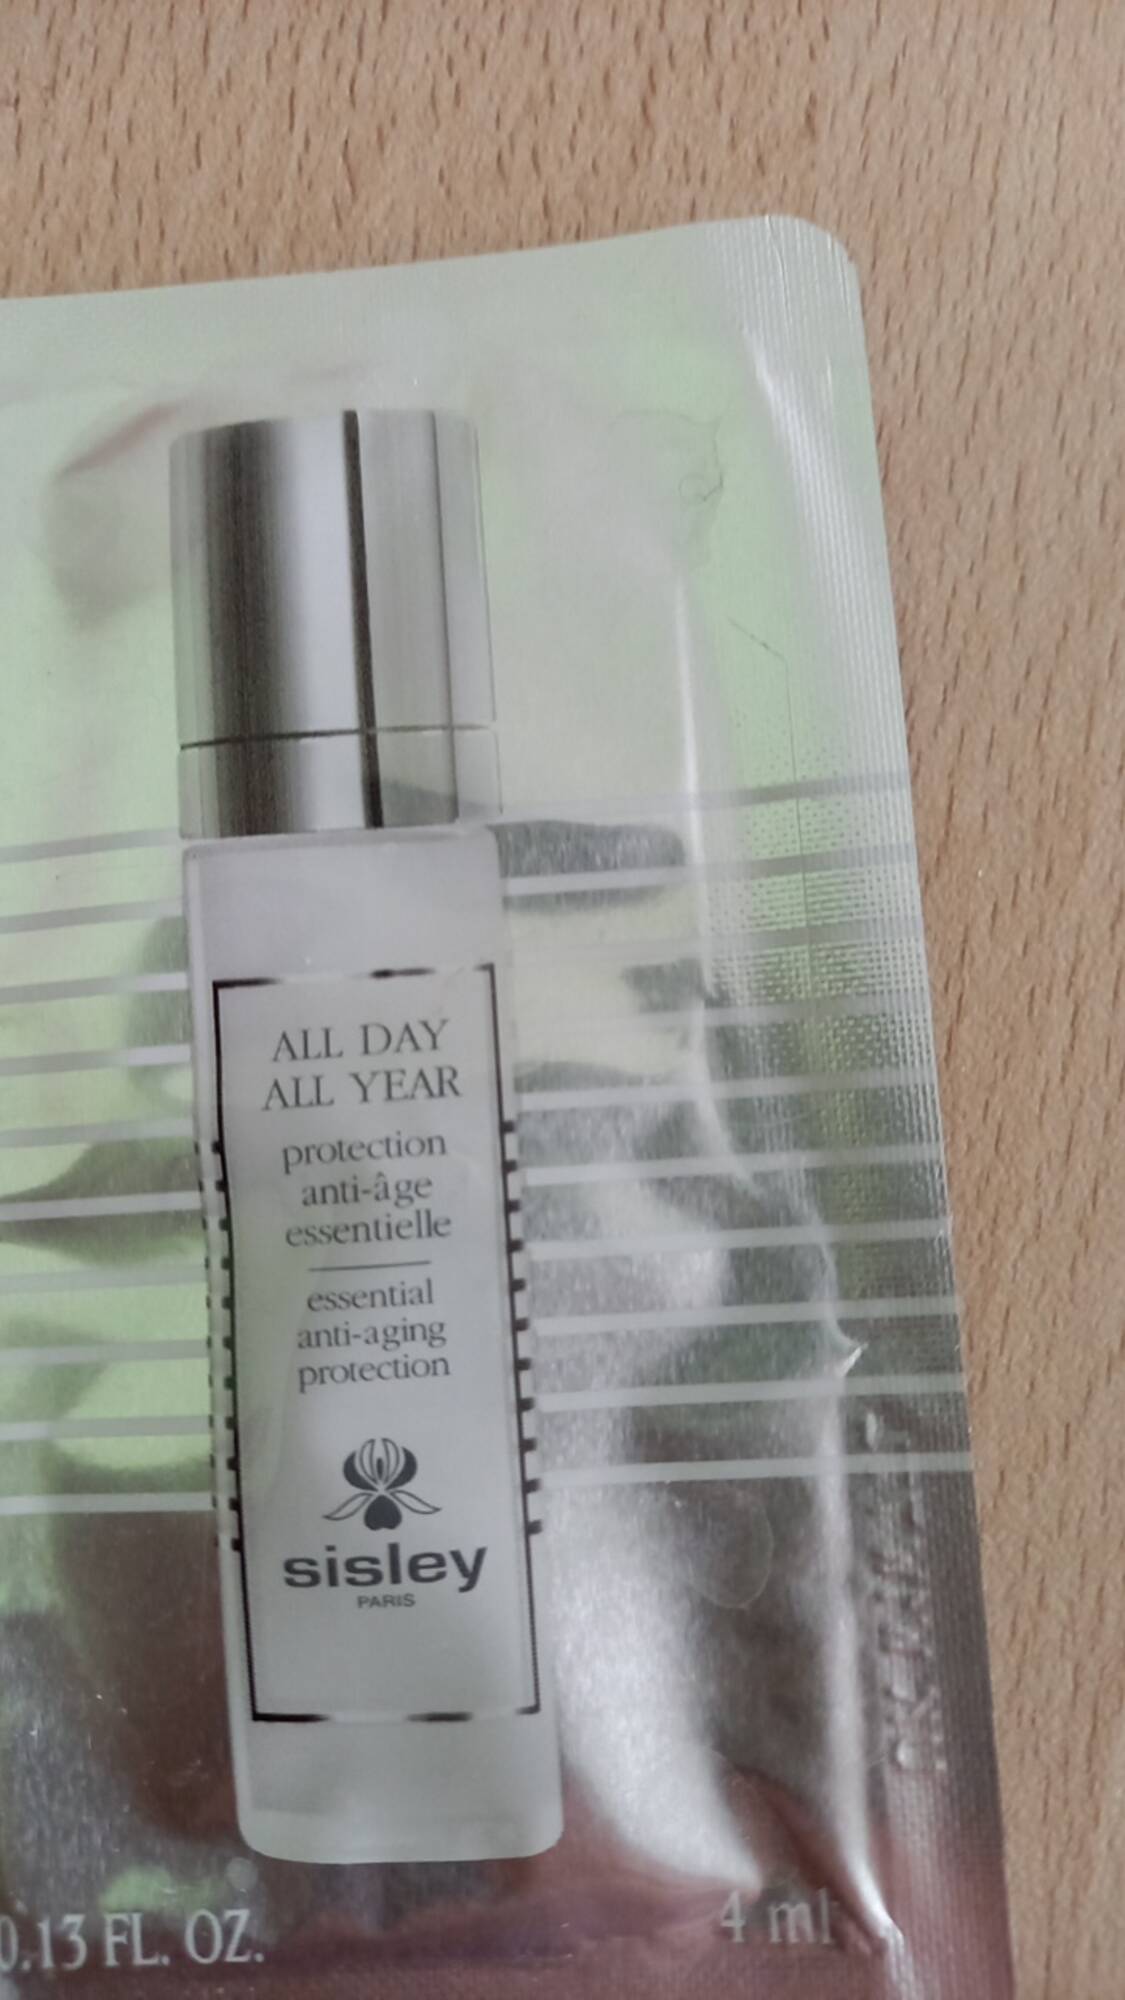 SISLEY - All day All year - Protection anti-âge essentielle